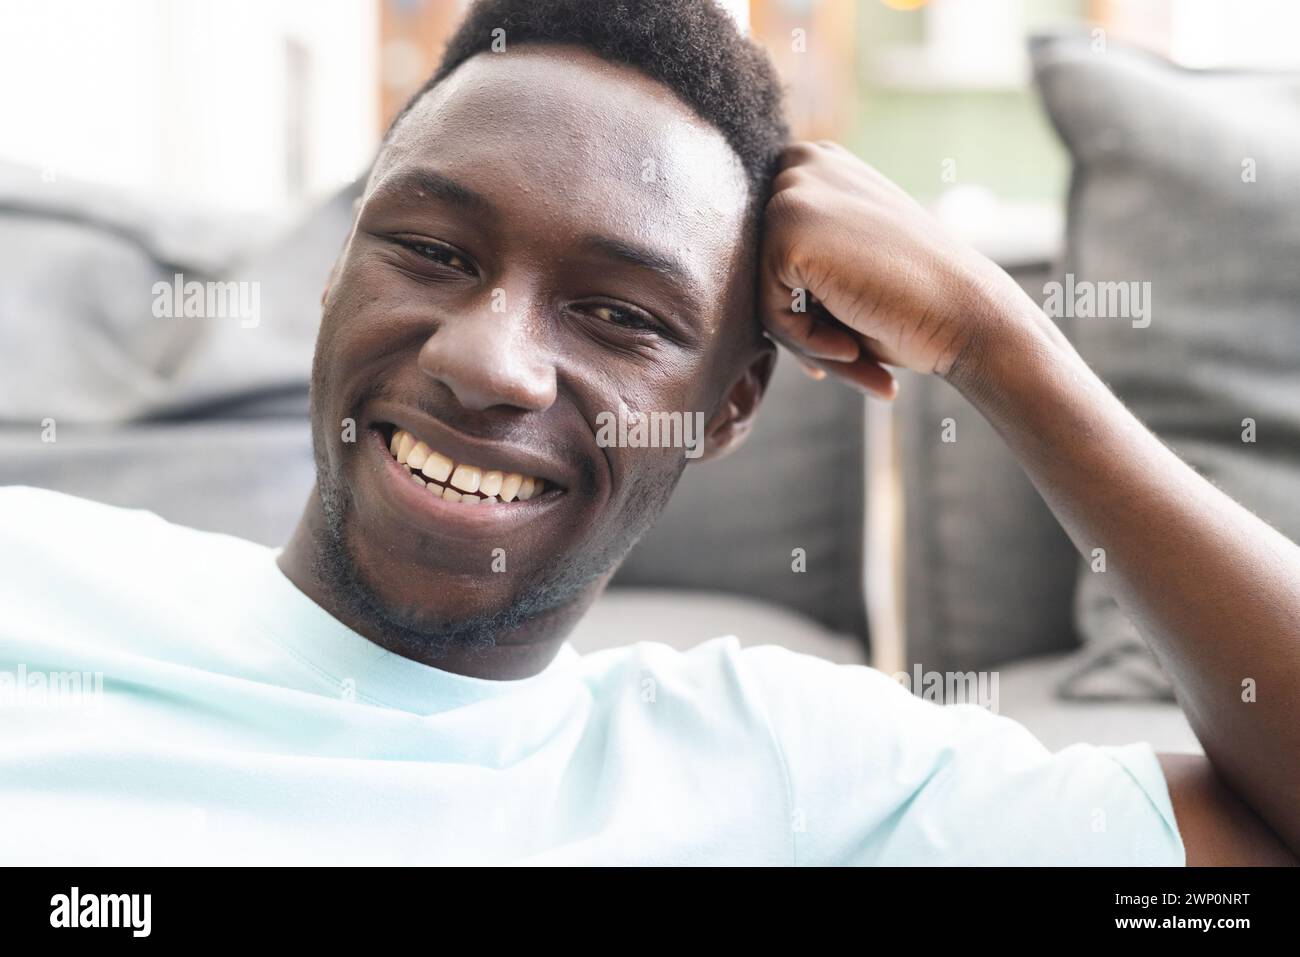 Young African American man smiles broadly, showcasing a casual style in a light blue shirt Stock Photo